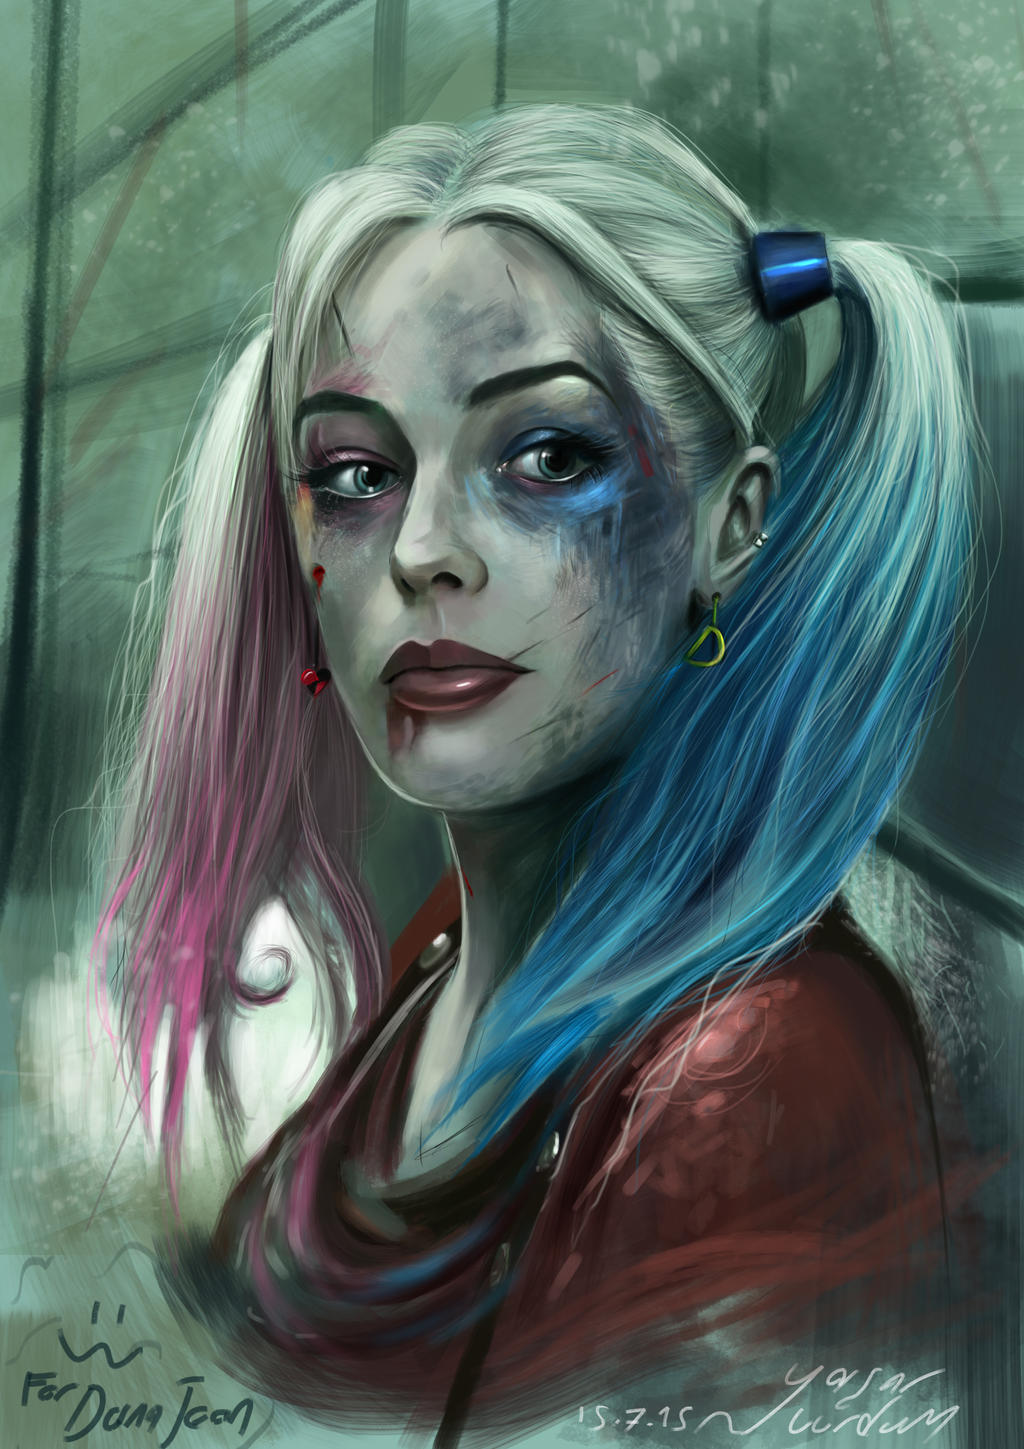 Harley quinn - Suicide squad ( to Dana Jean )